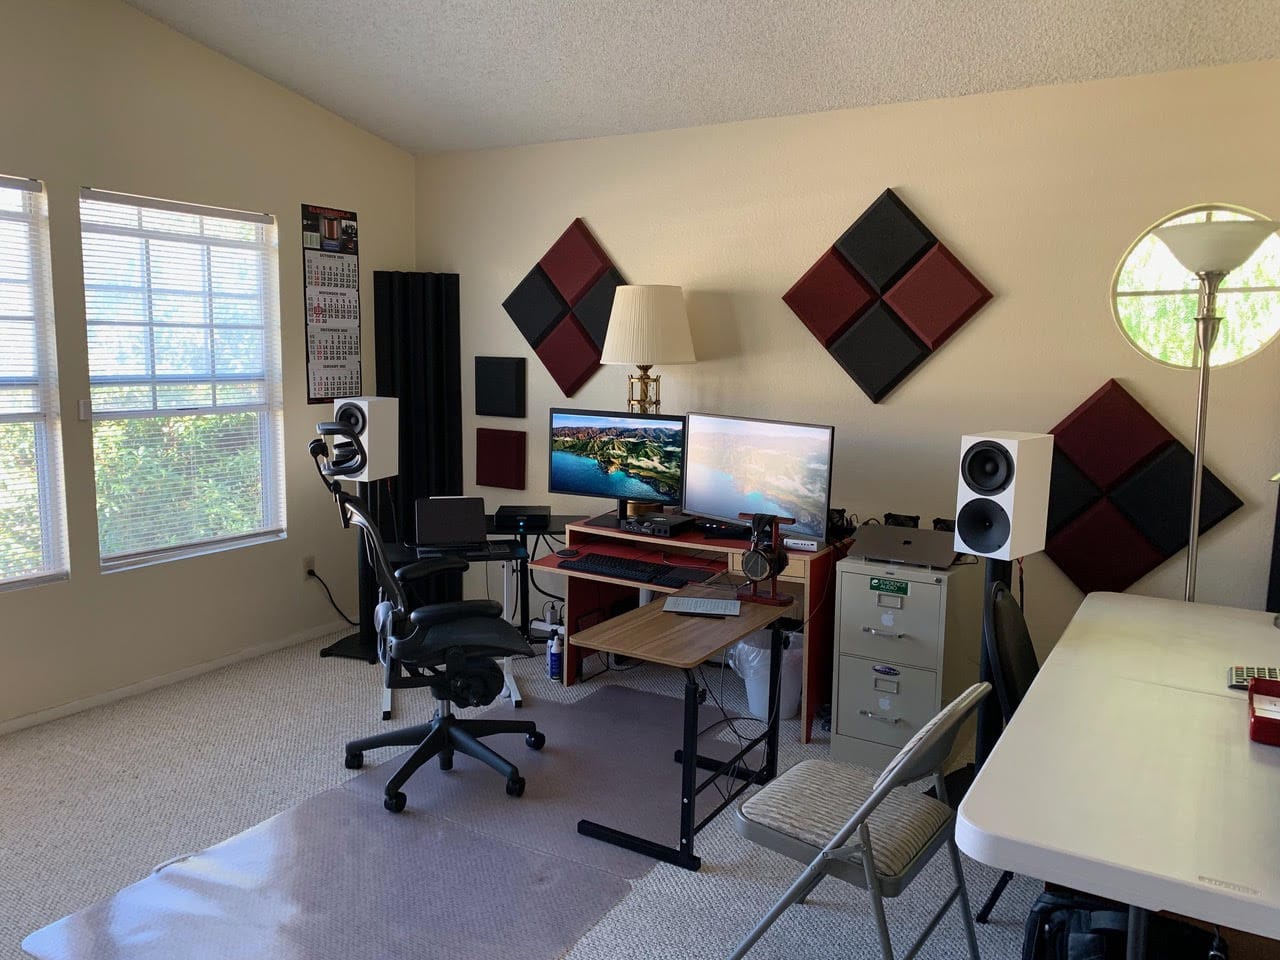 An audiophile's setup includes not just computers and a killer sound system, but sound enhancers on the walls and in corners.